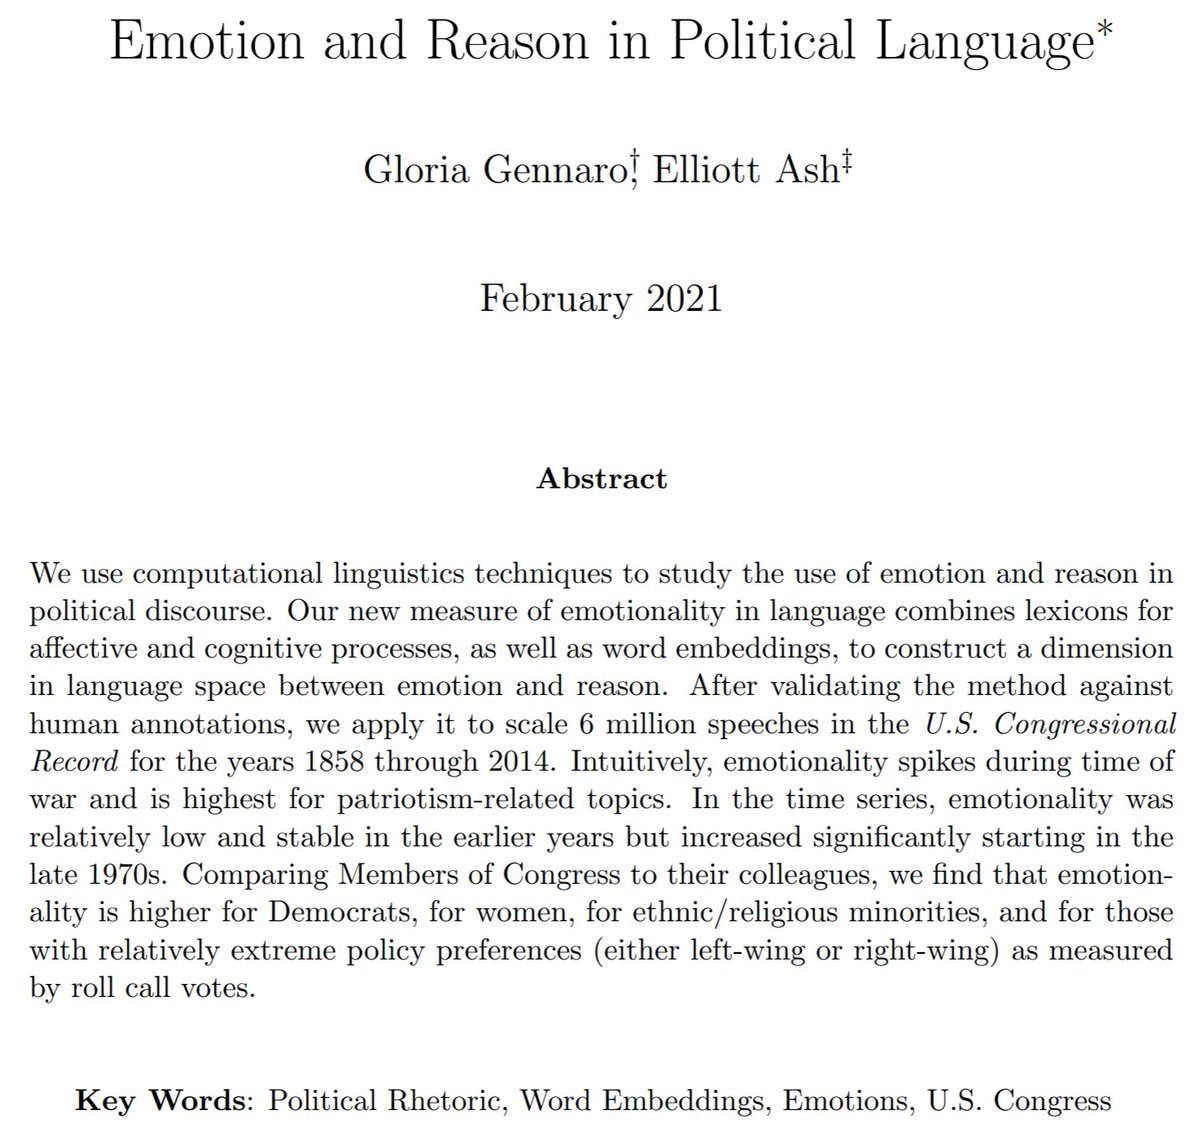 “In politics, when reason and emotion collide, emotion invariably wins.” -- Drew Westen, The Political Brain.Interesting idea! What do the data say about that?New working paper: "Emotion and Reason in Political Language", with  @gloriagennaro.PDF:  http://bit.ly/gennaro-ash-emotions